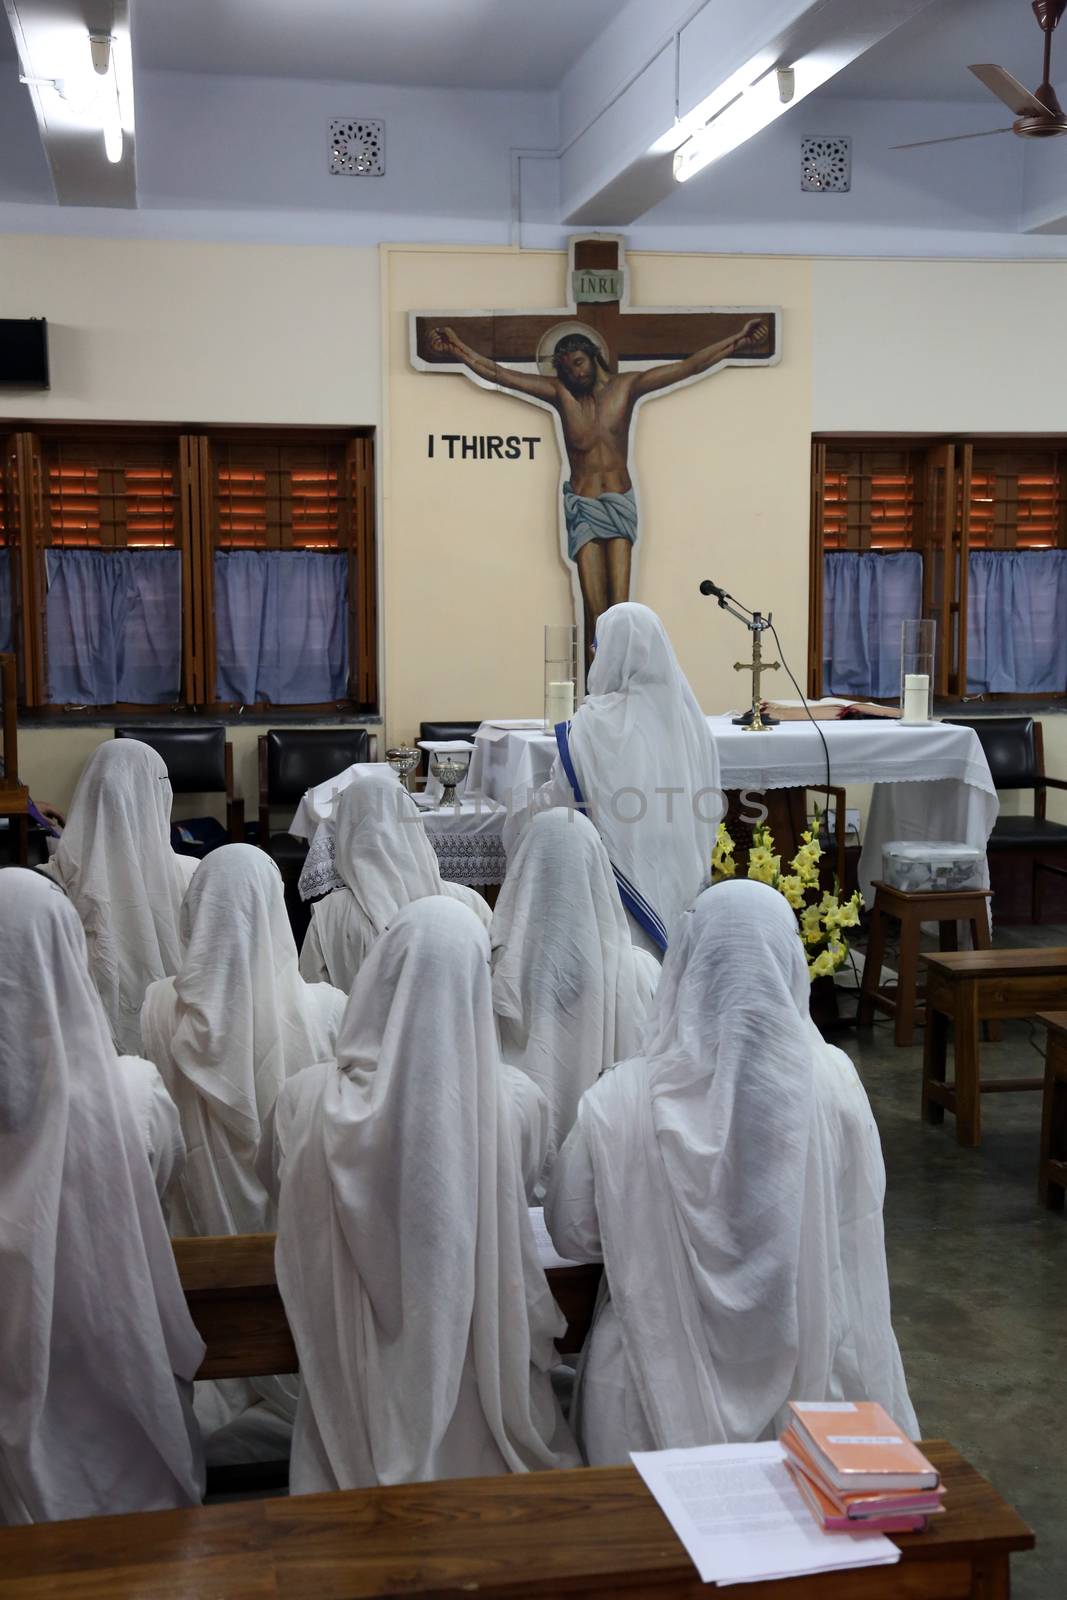 Sisters of Mother Teresa's Missionaries of Charity in prayer in the chapel of the Mother House, Kolkata, India at February 07, 2014.